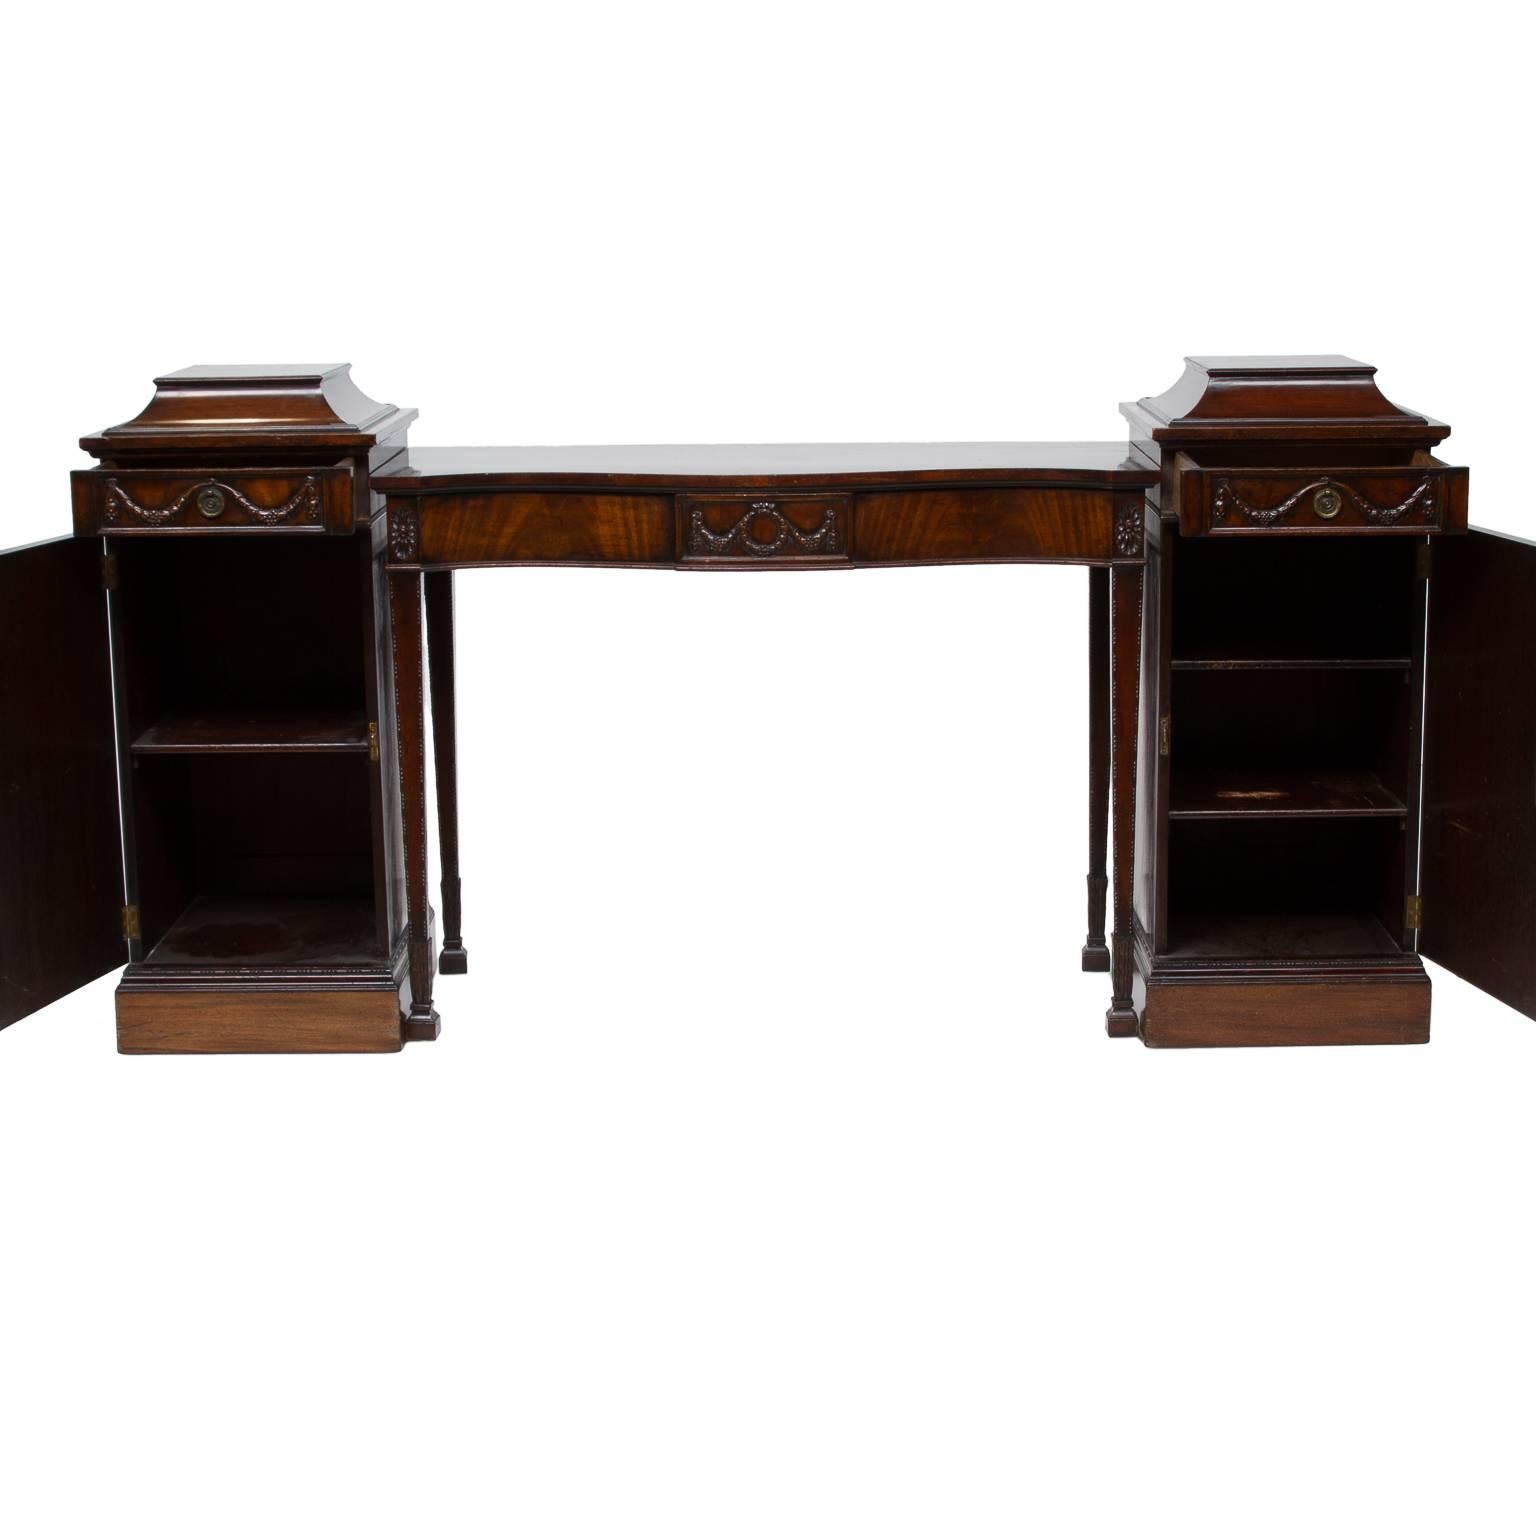 Pedestal base mahogany sideboard in the style of Scottish neoclassical architect Robert Adams, with carved swags and rosettes. Features four drawers and two cabinets. Interior cabinet has one shelves. The piece separates to reveal a console in